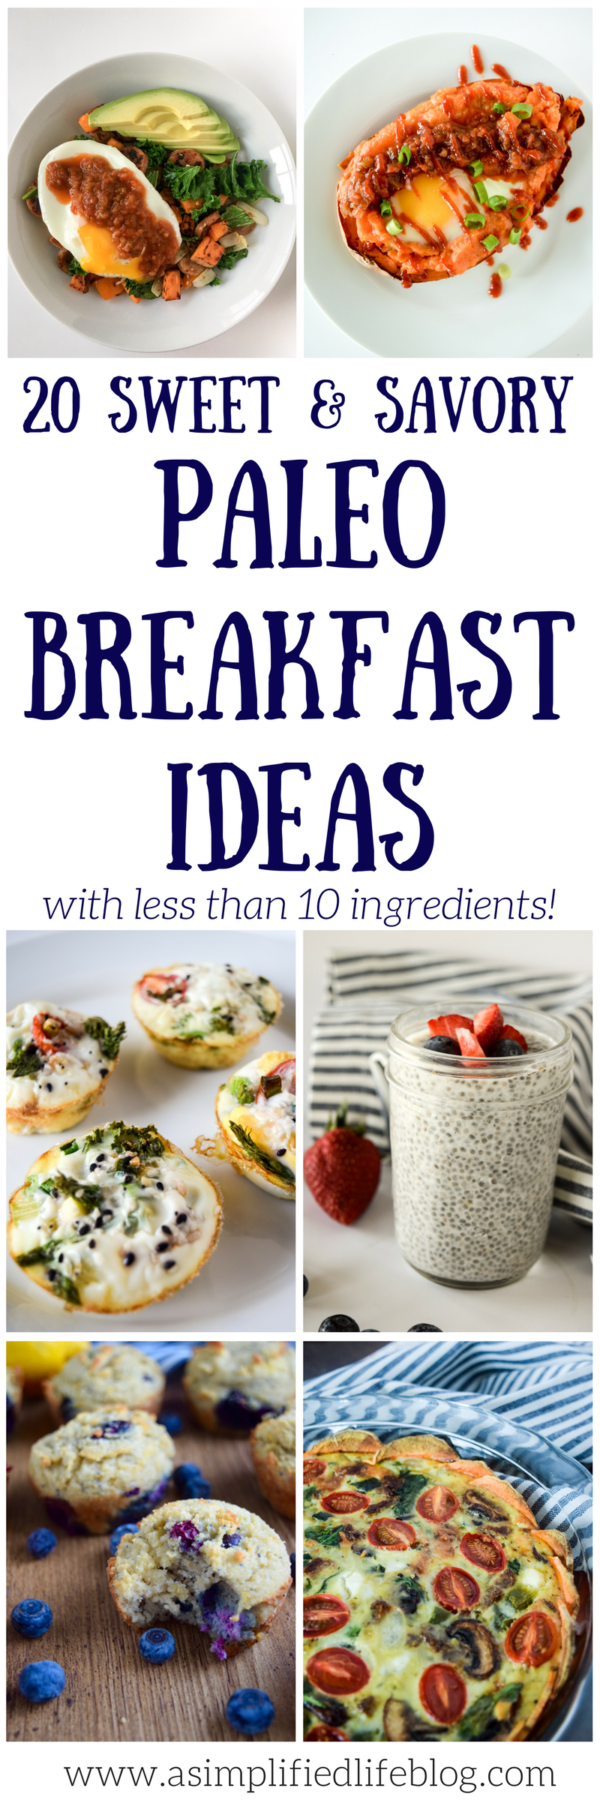 These sweet and savory paleo breakfast ideas are perfect to get you out of the repeat-breakfast rut!